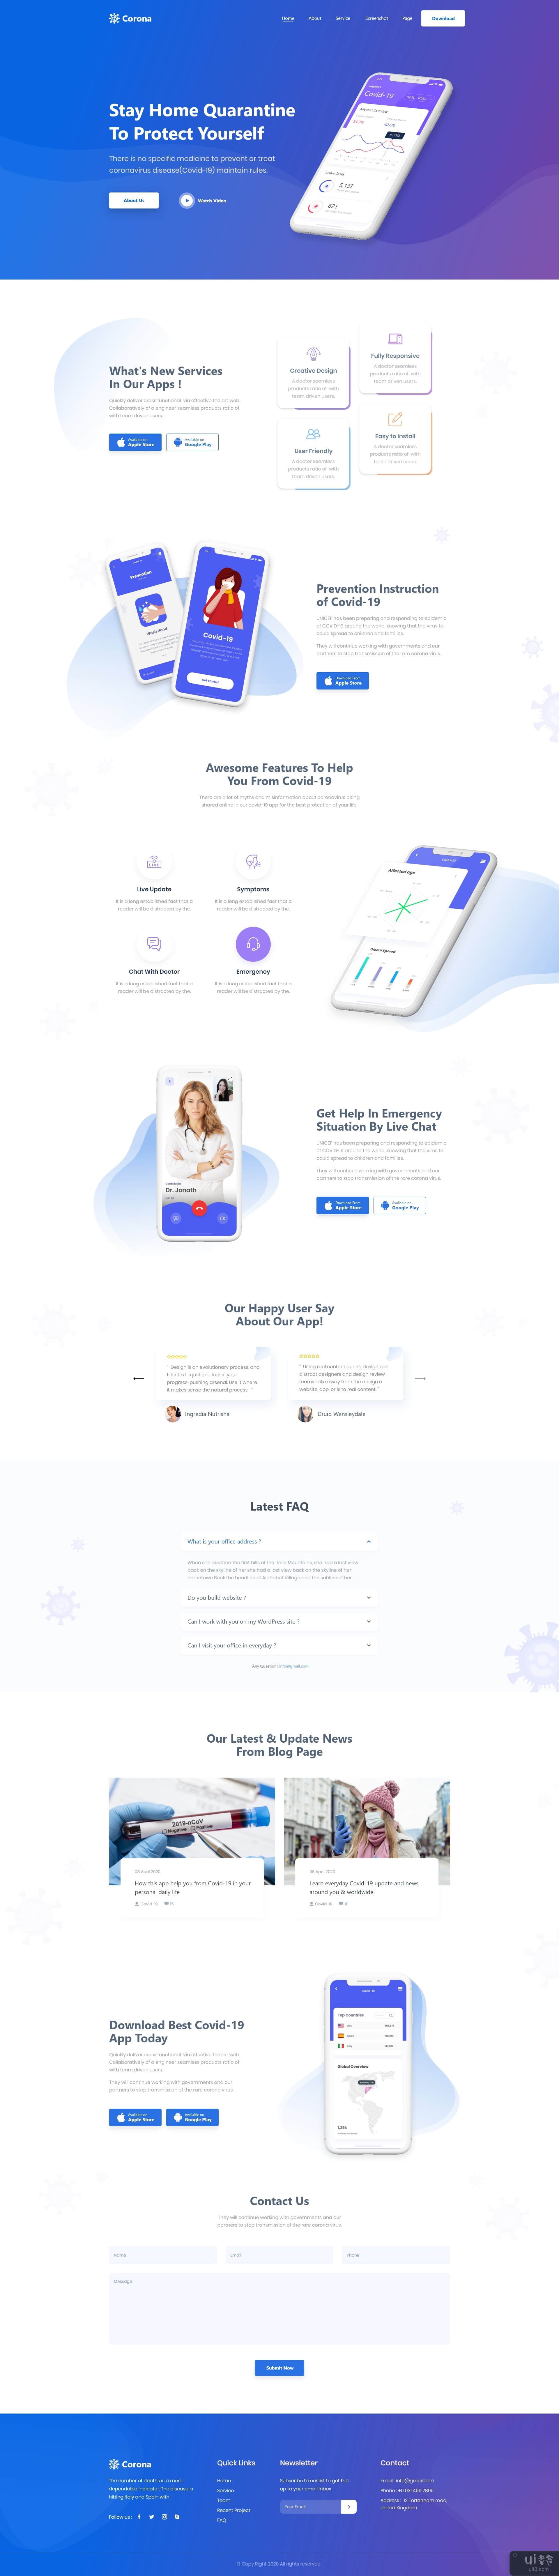 Covid-19 - 移动应用登陆页面模板(Covid-19 - Mobile App Landing Page Template)插图